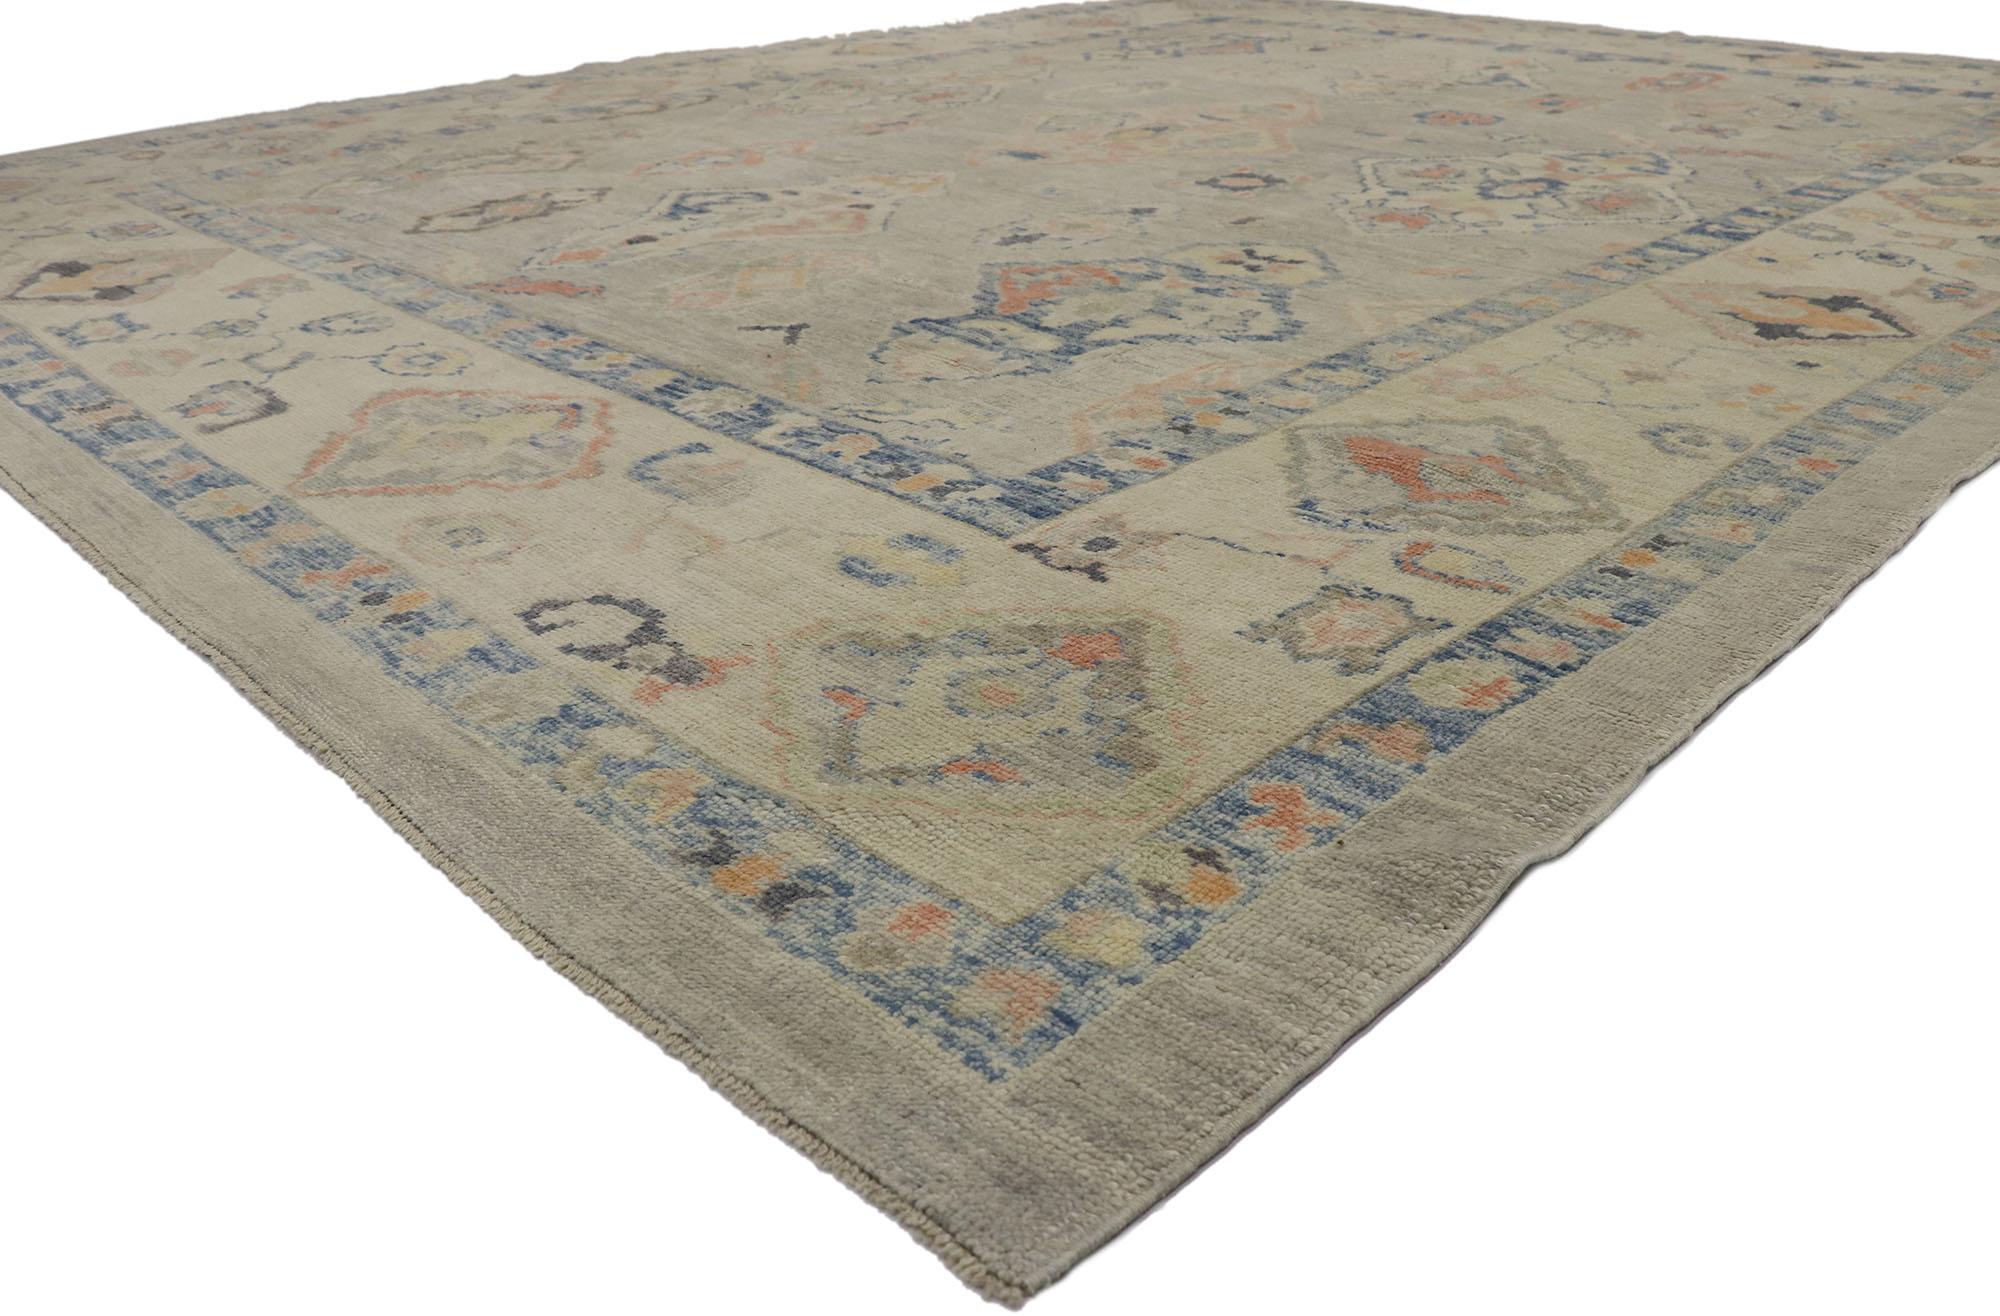 53608 New Modern Turkish Oushak Rug, 11'09 x 15'00. Exuding both refinement and whimsy, this hand-knotted wool Turkish Oushak rug is a captivating embodiment of modern elegance. Its abrashed gray field serves as a sophisticated backdrop for an array